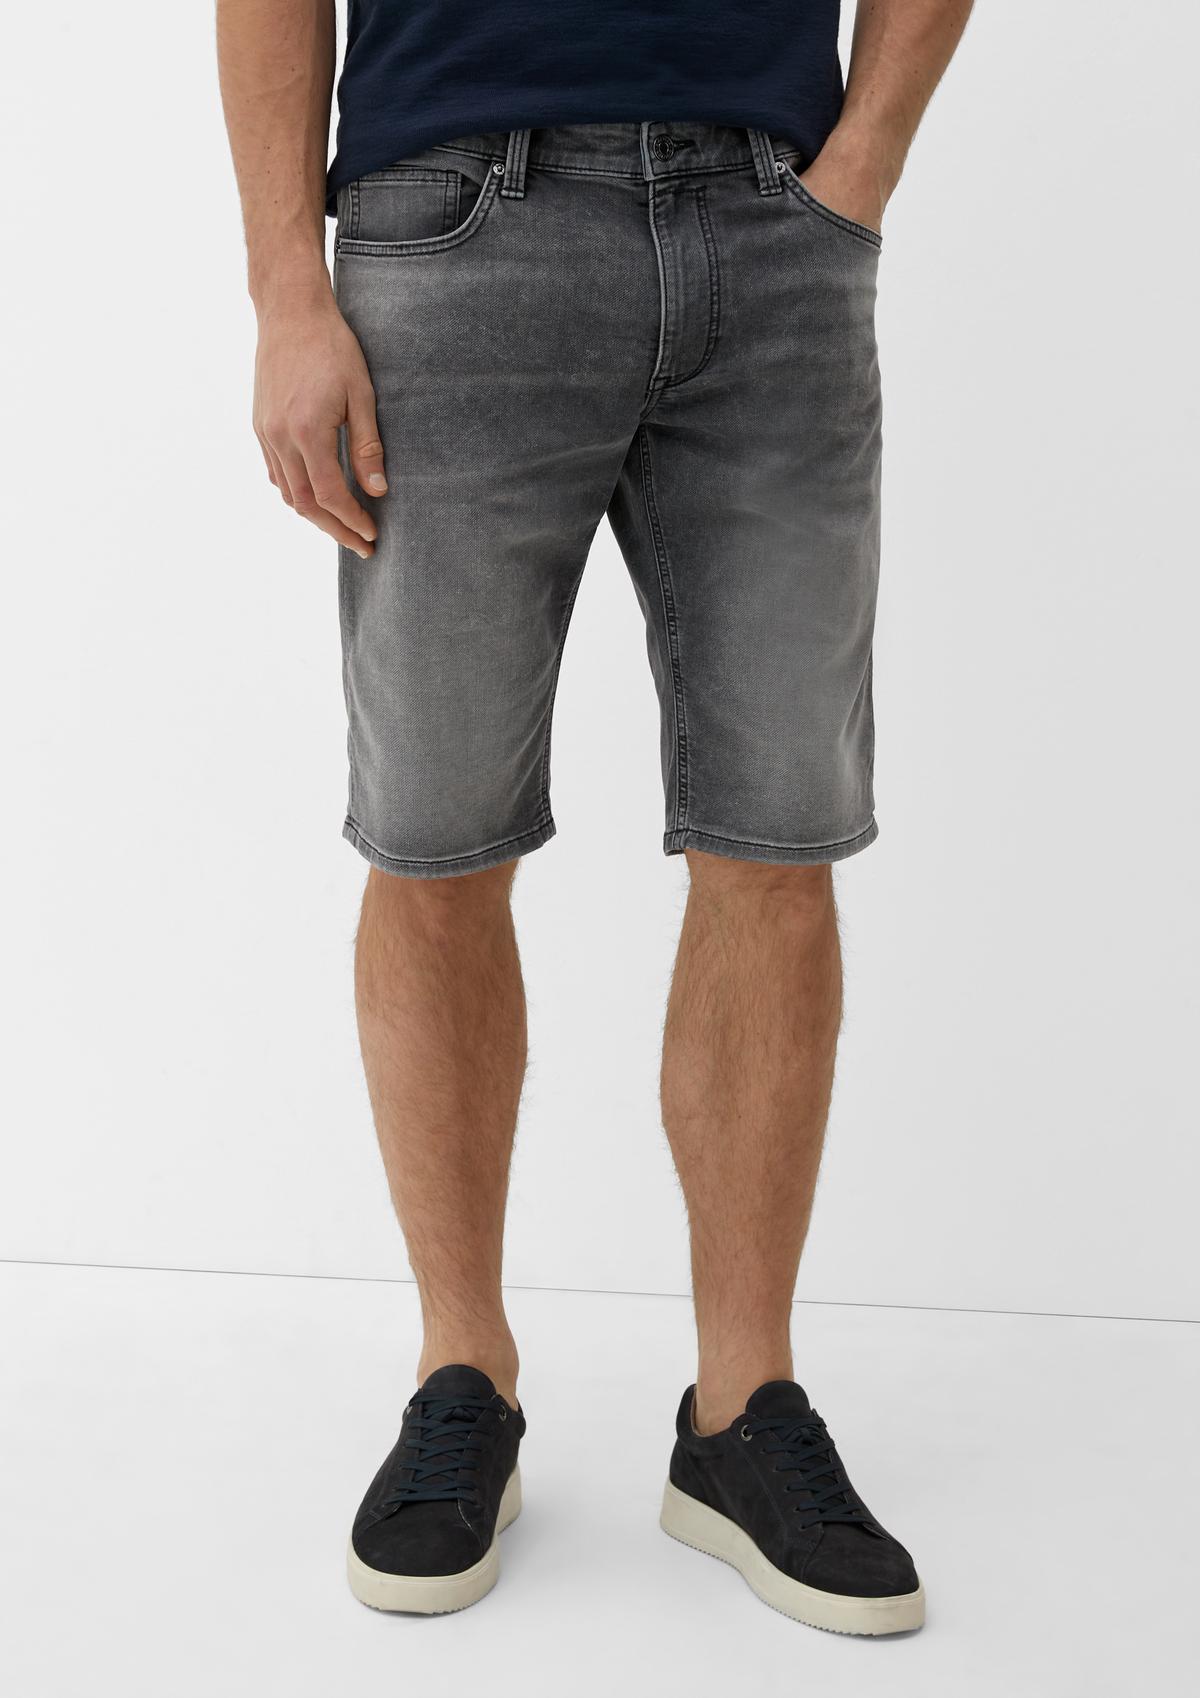 s.Oliver Jeans-Shorts / Regular Fit / Mid Rise / Straight Leg